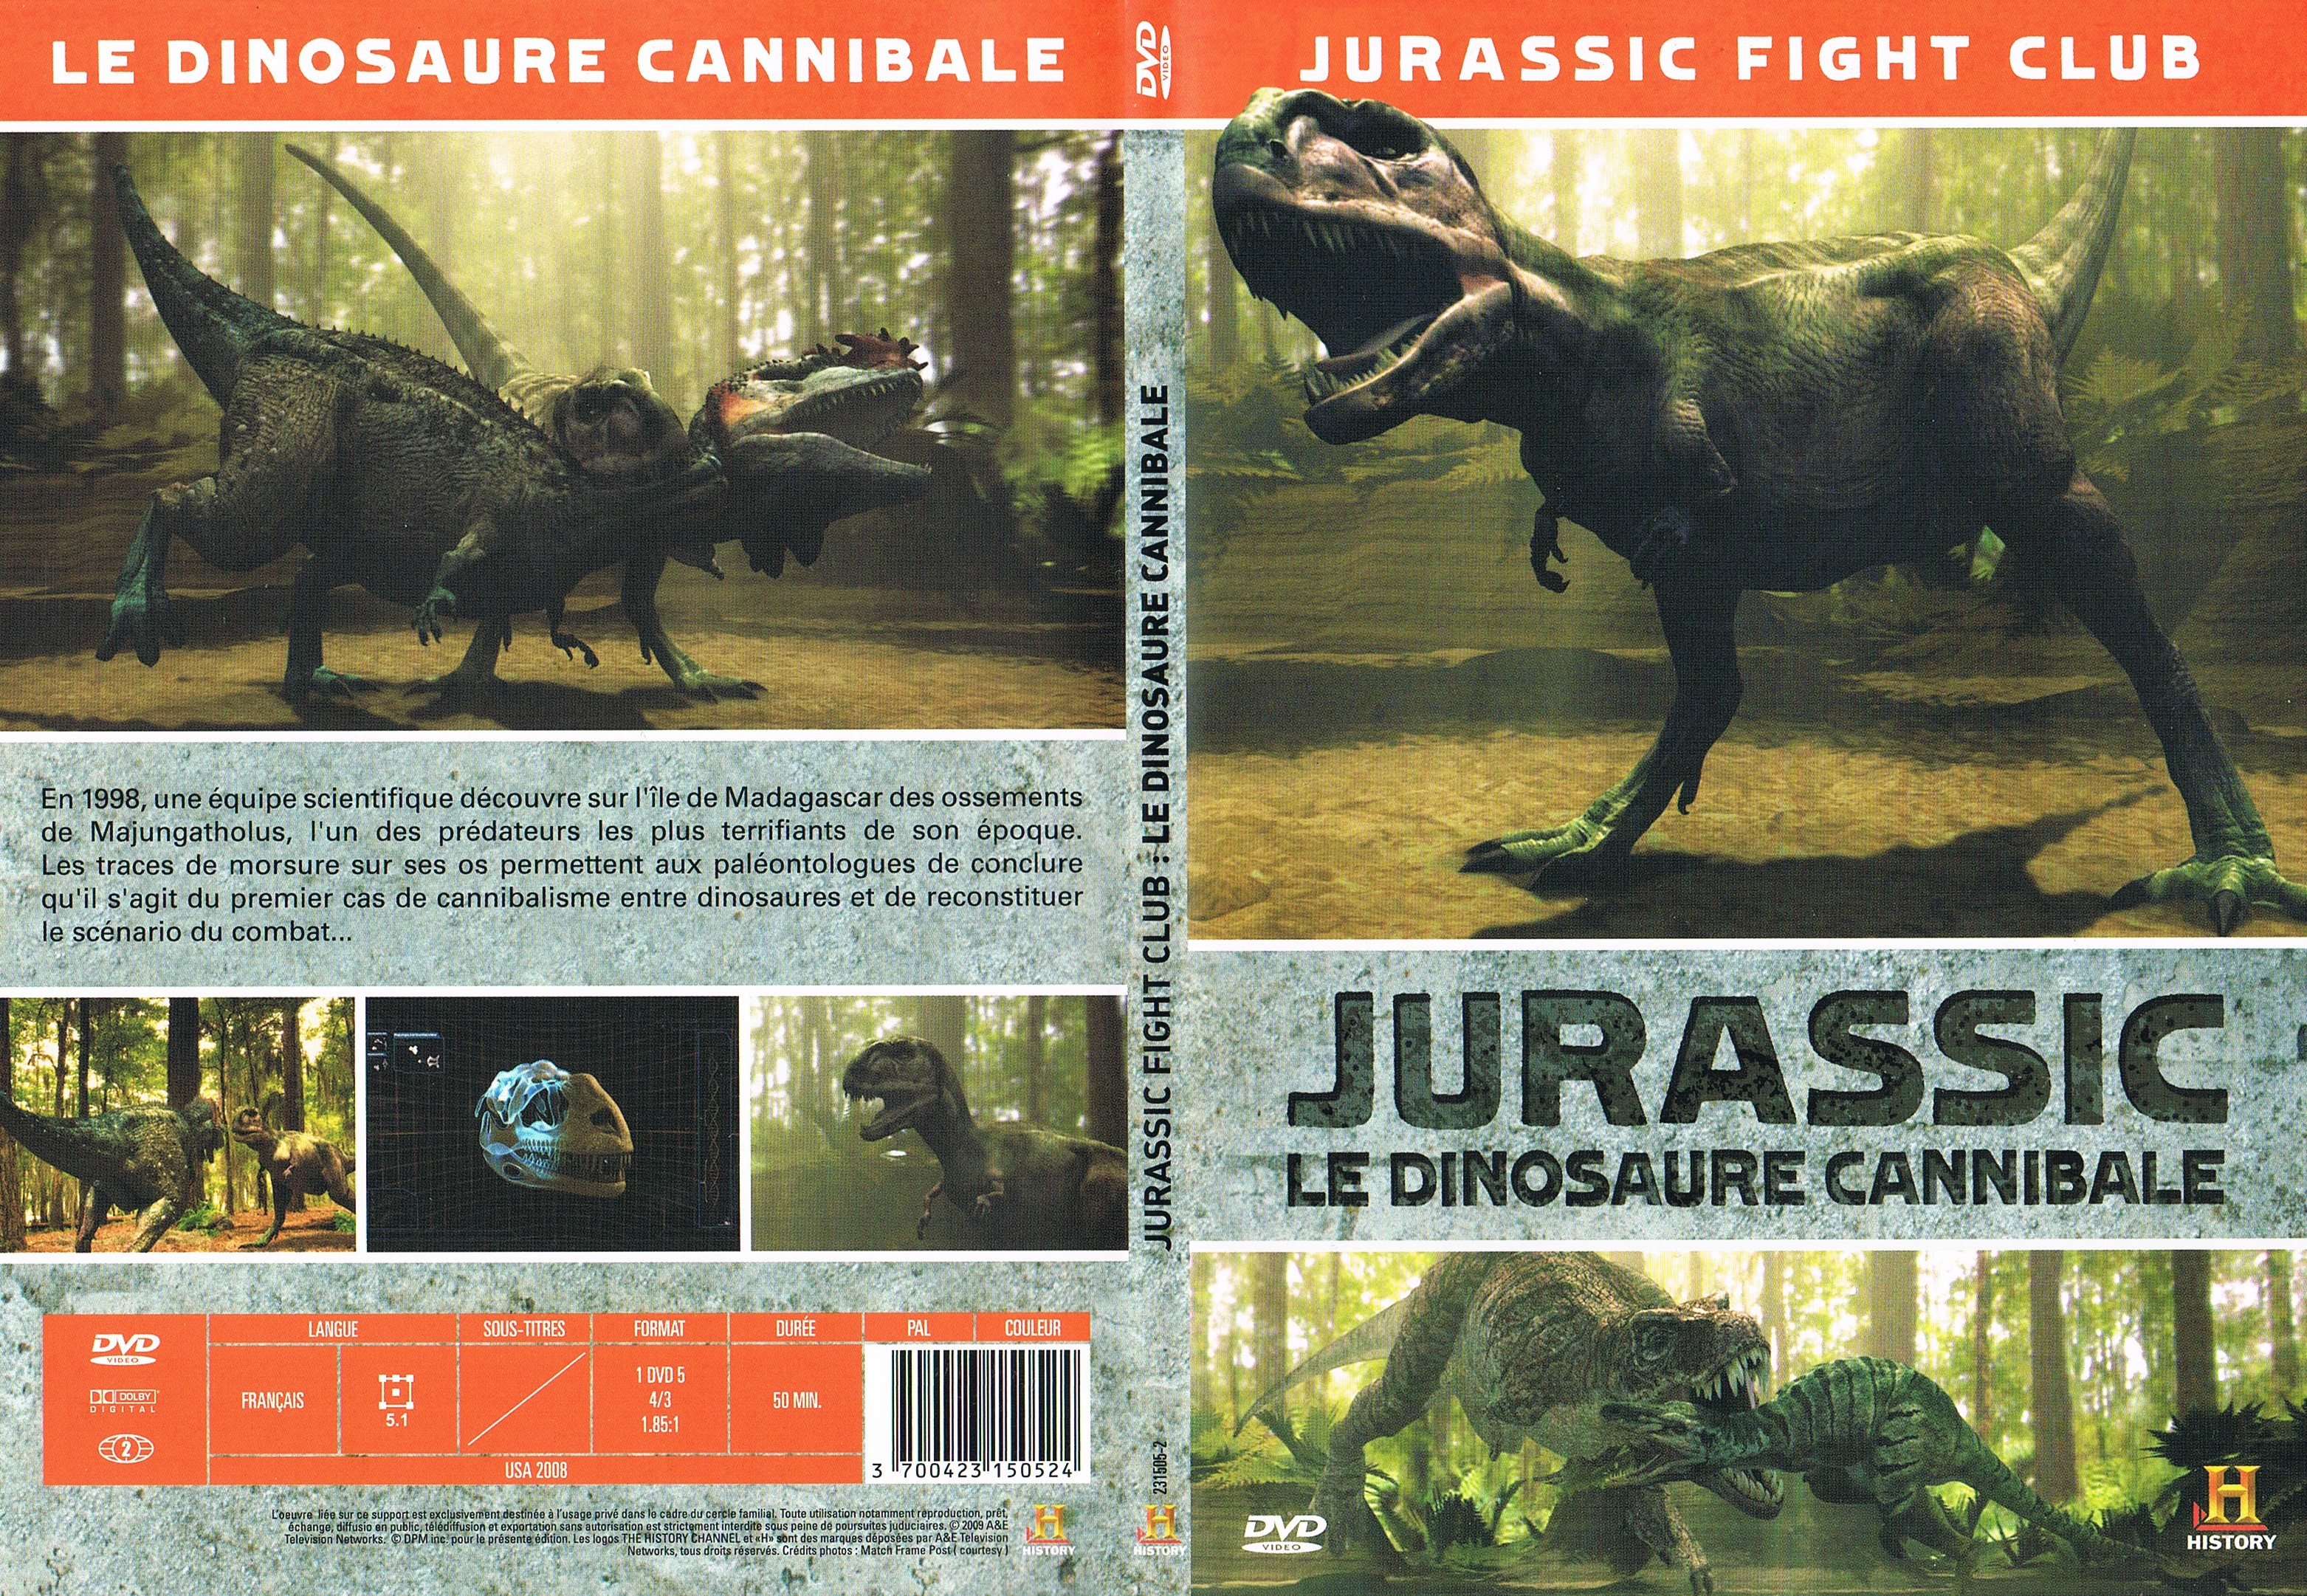 Jaquette DVD Jurassic Fight Club - Le Dinosaure Cannibale